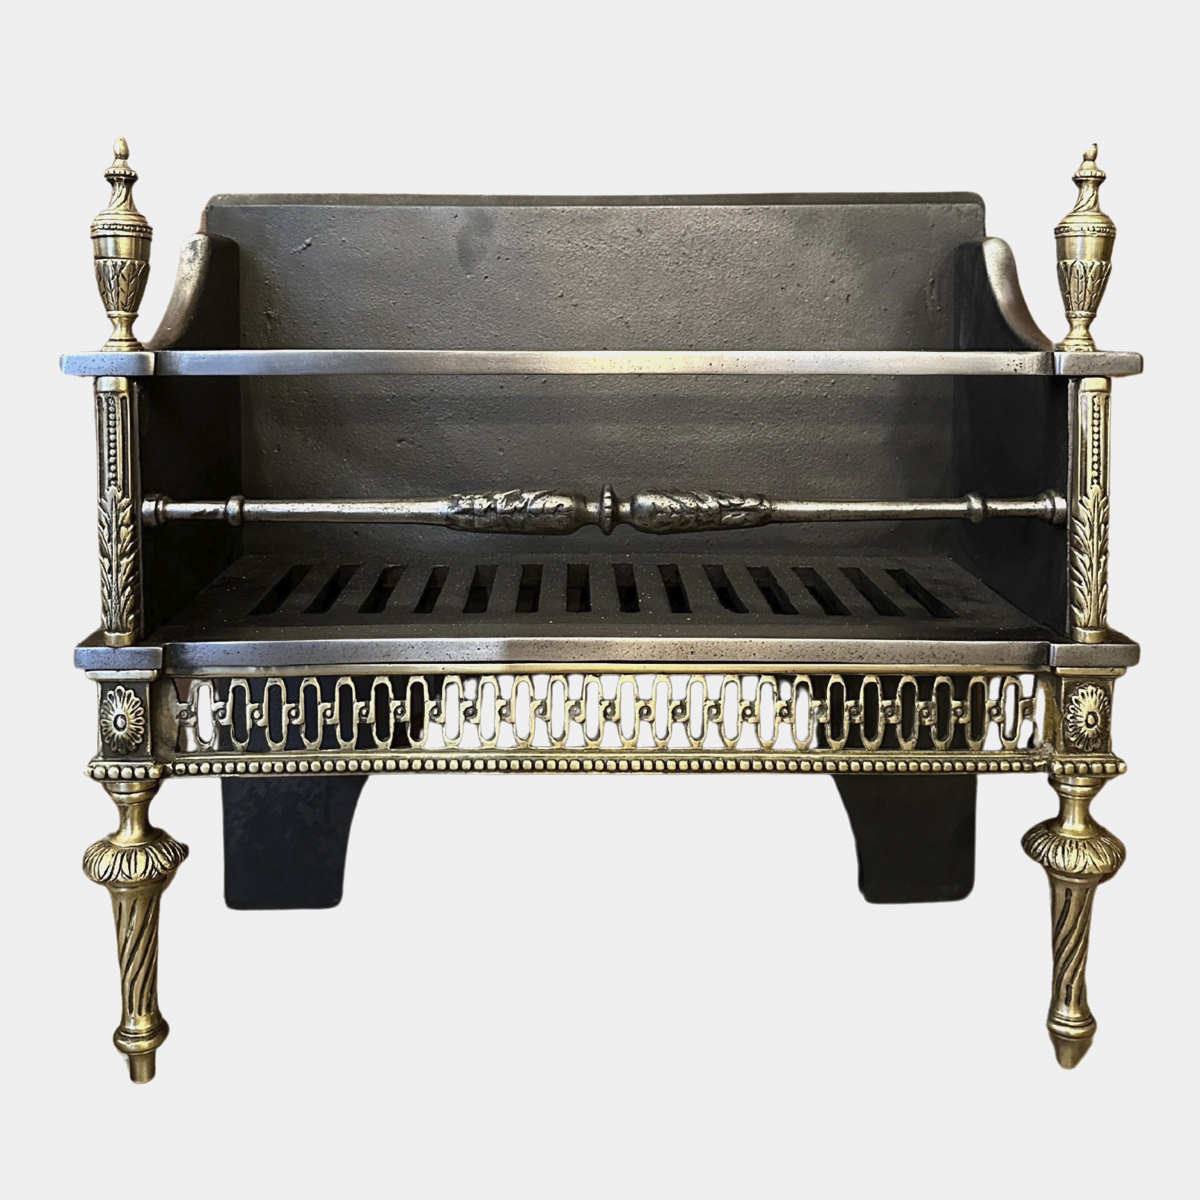 An English  Antique Regency Style Brass and Steel Fire grate